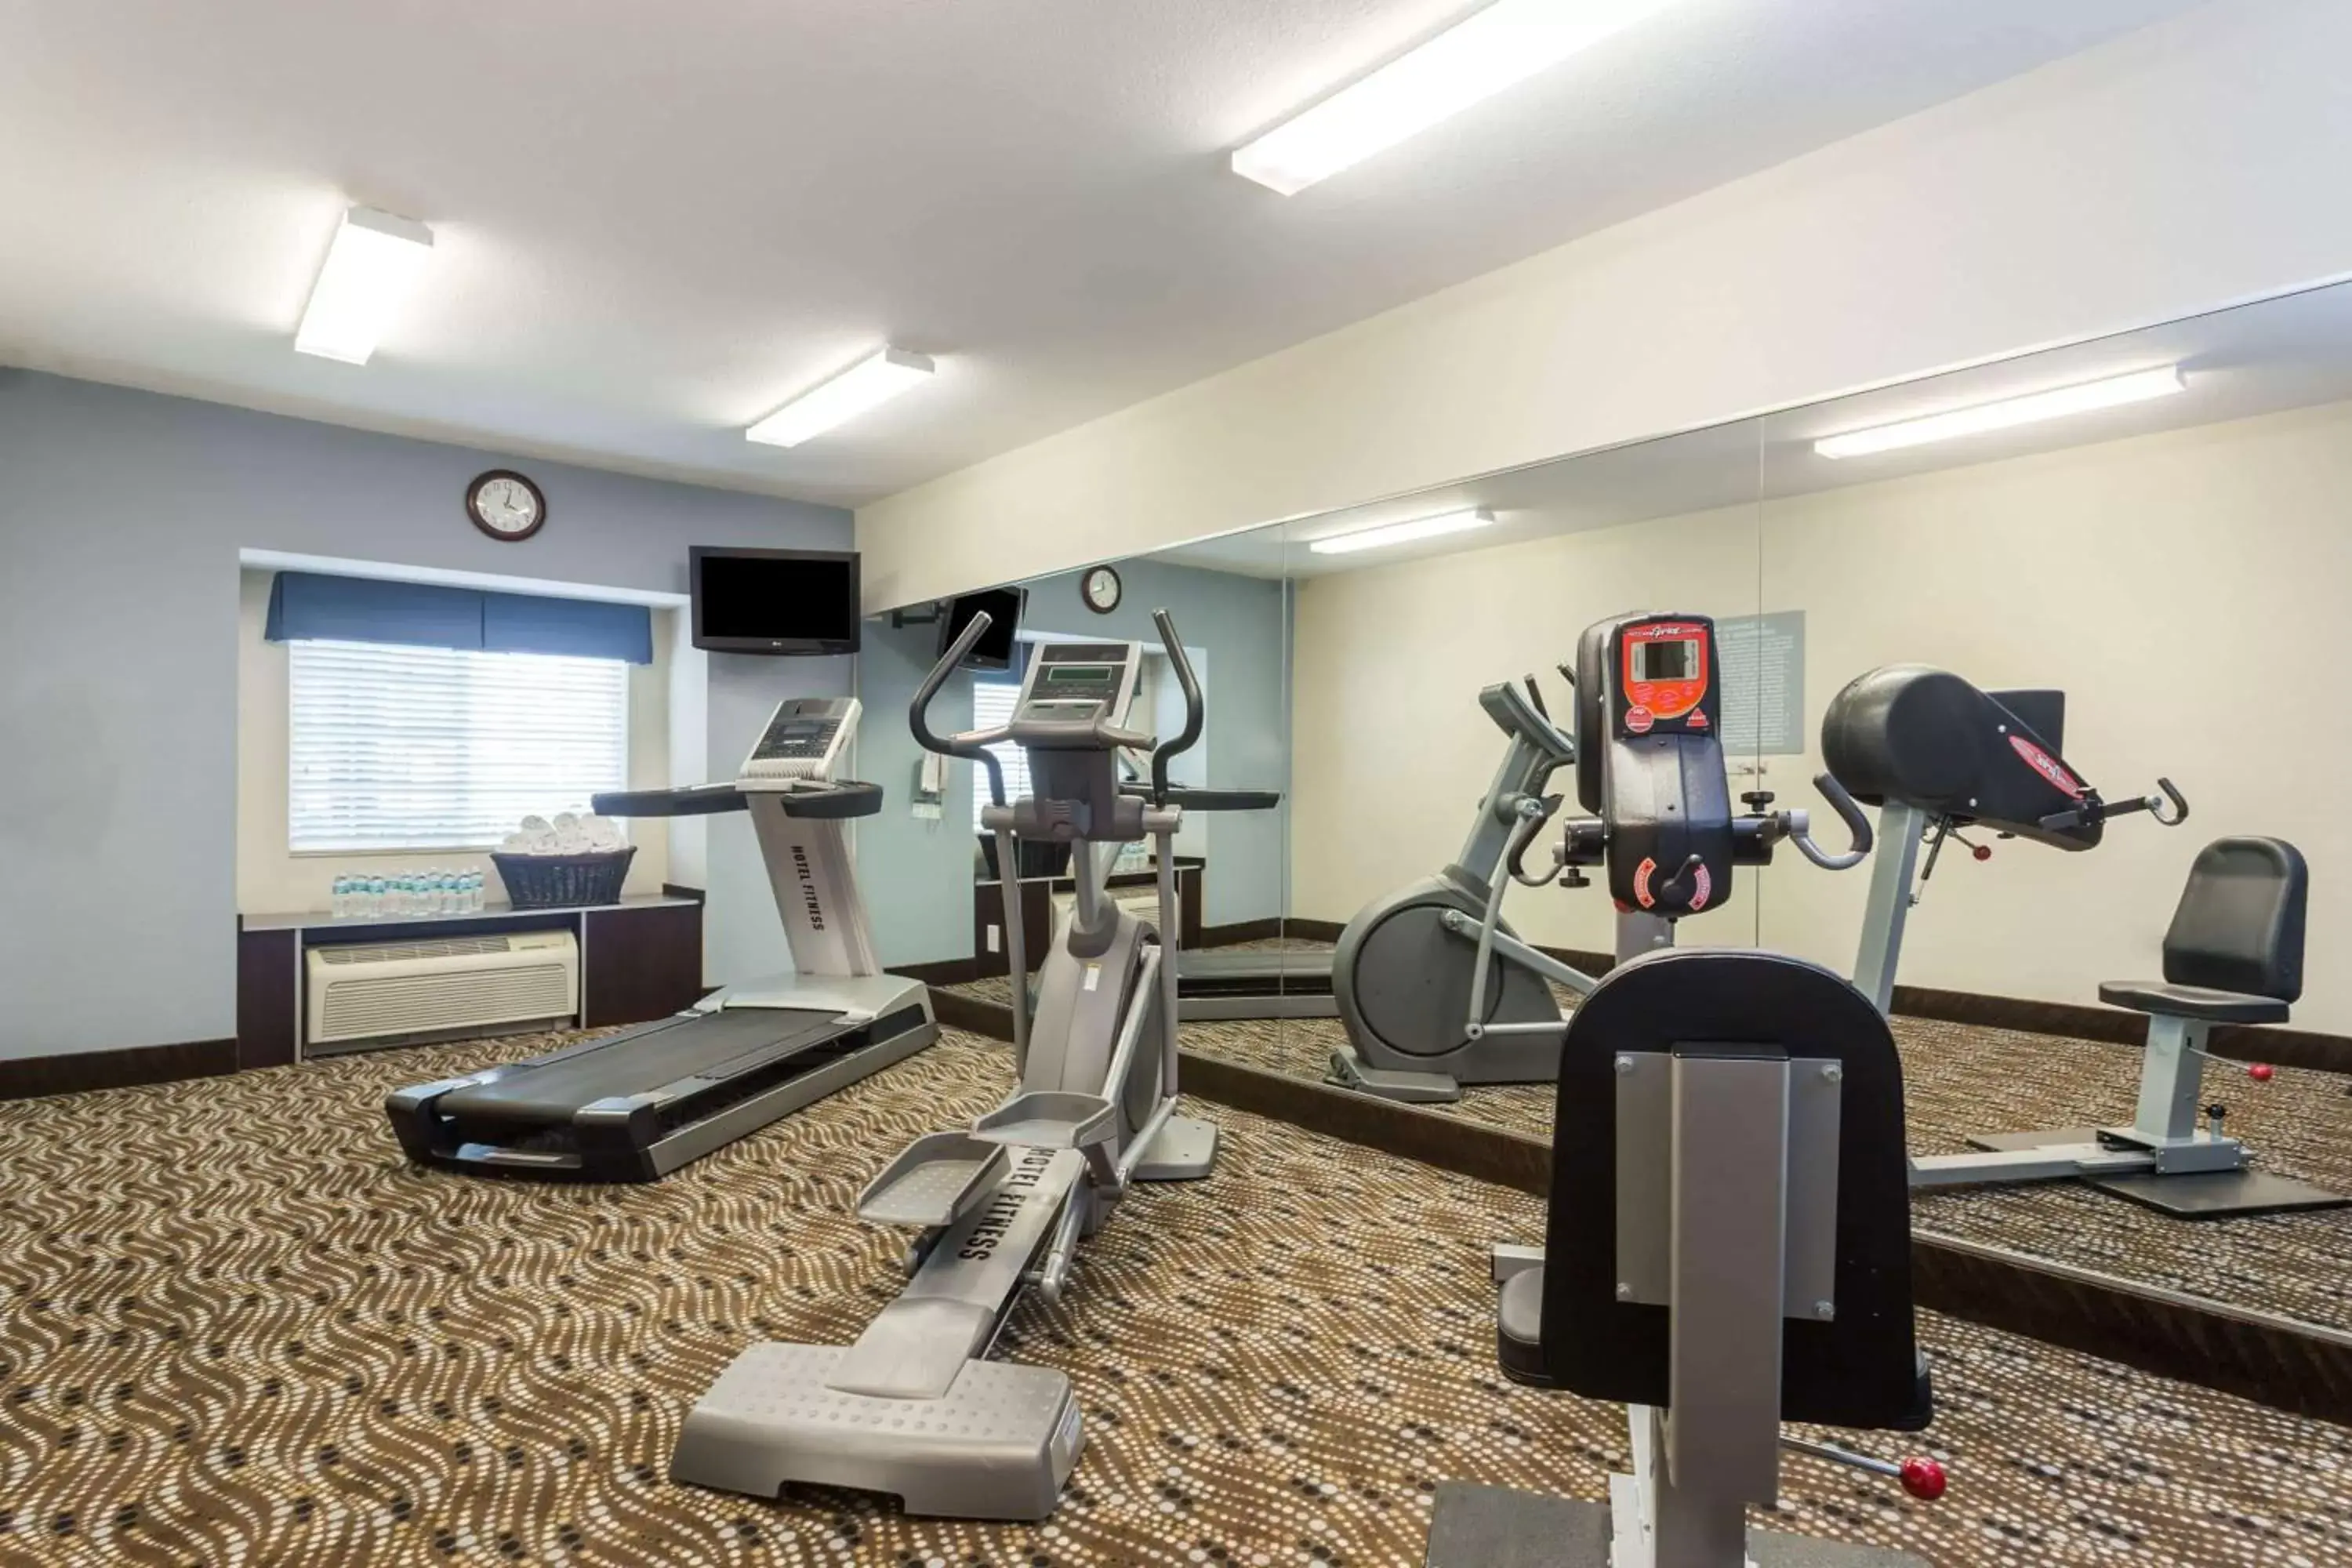 Fitness centre/facilities, Fitness Center/Facilities in Microtel Inn & Suites by Wyndham Spring Hill/Weeki Wachee